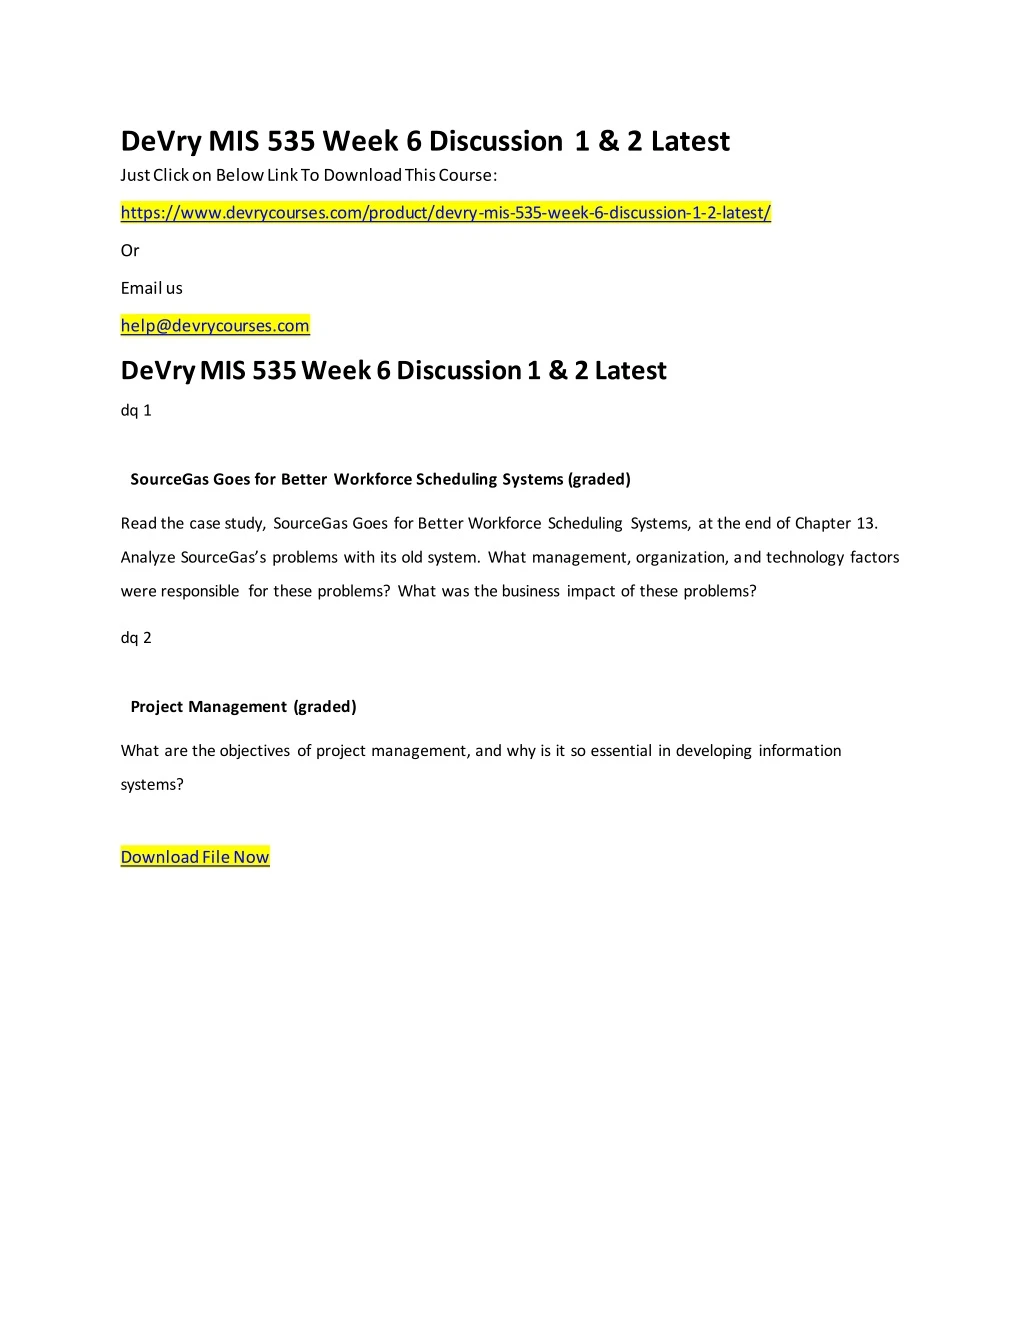 devry mis 535 week 6 discussion 1 2 latest just